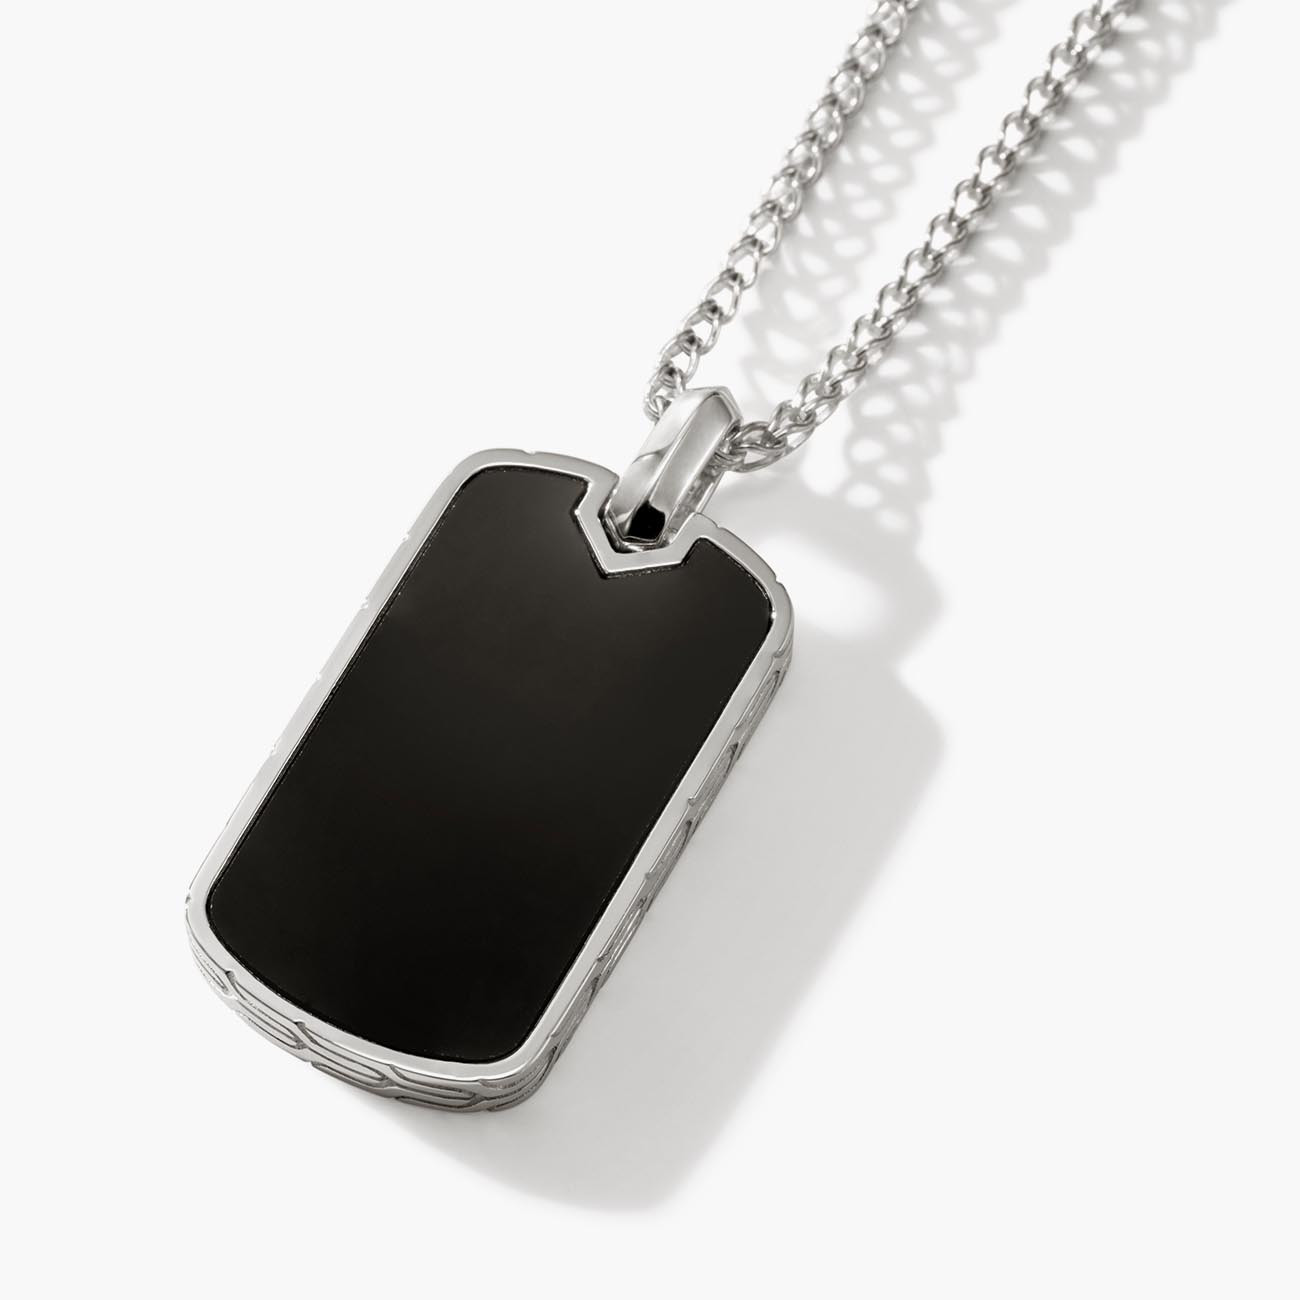 Silver Dog tag Pendant on Etruscan Chain Necklace with Treated Onyx Closeup